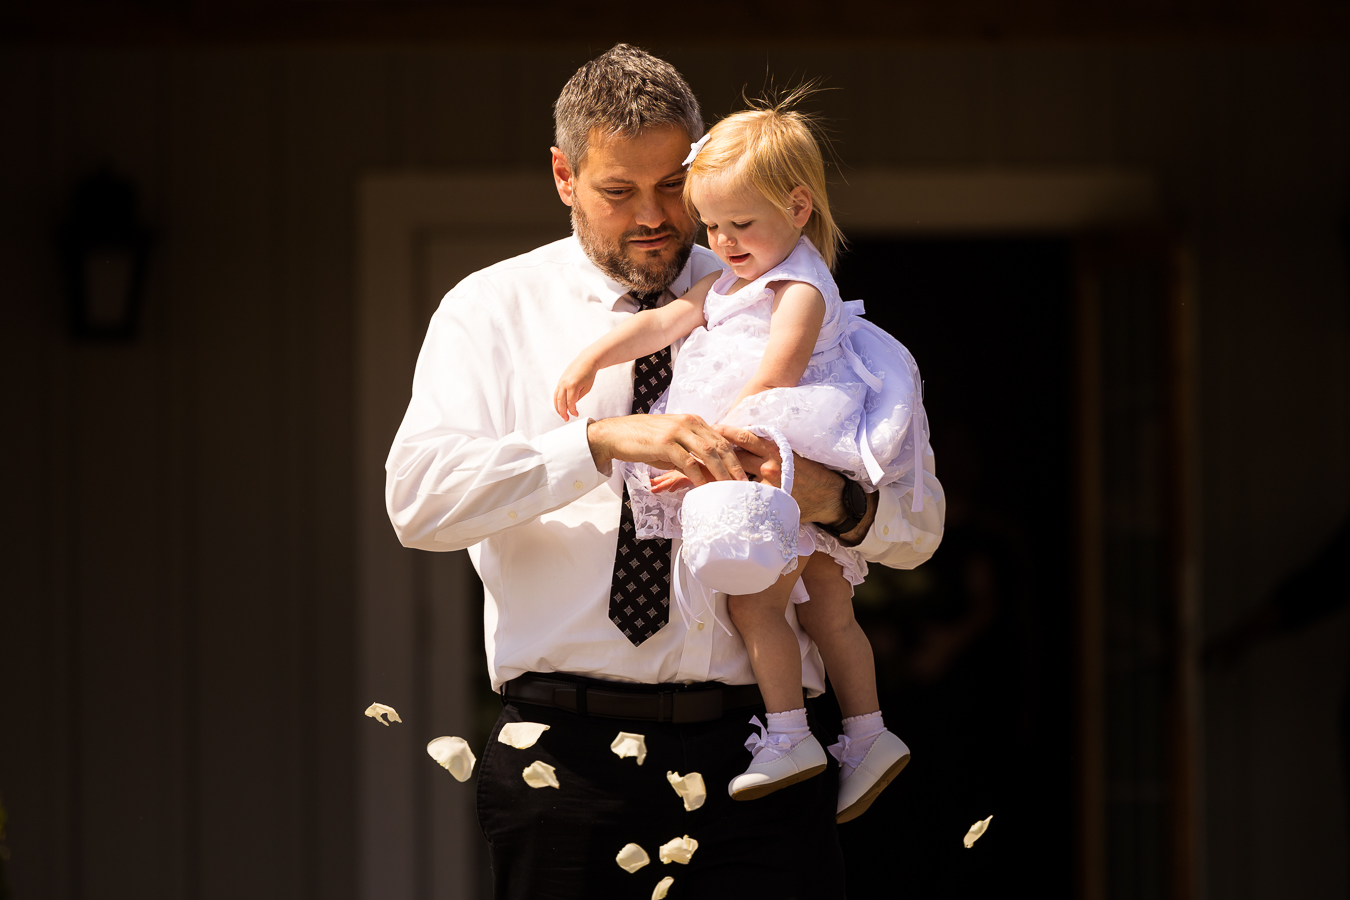 Image of a man holding the baby flower girl and throwing white petals as they walk down the aisle together at the start of the wedding ceremony 